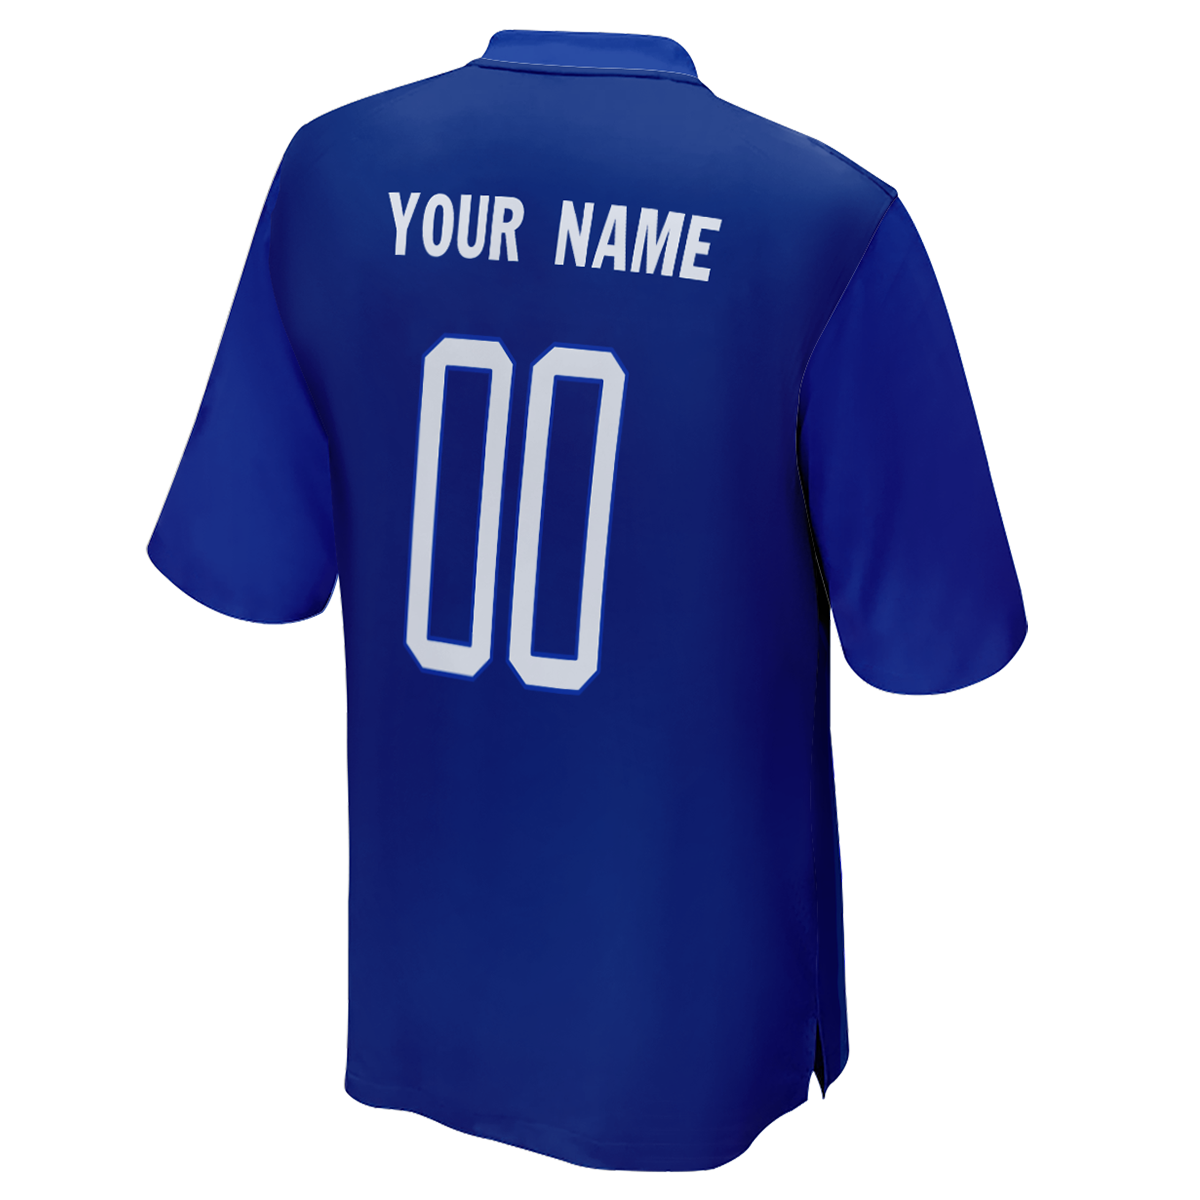 Men's Vintage Italy World Cup Custom Soccer Jersey With Logo